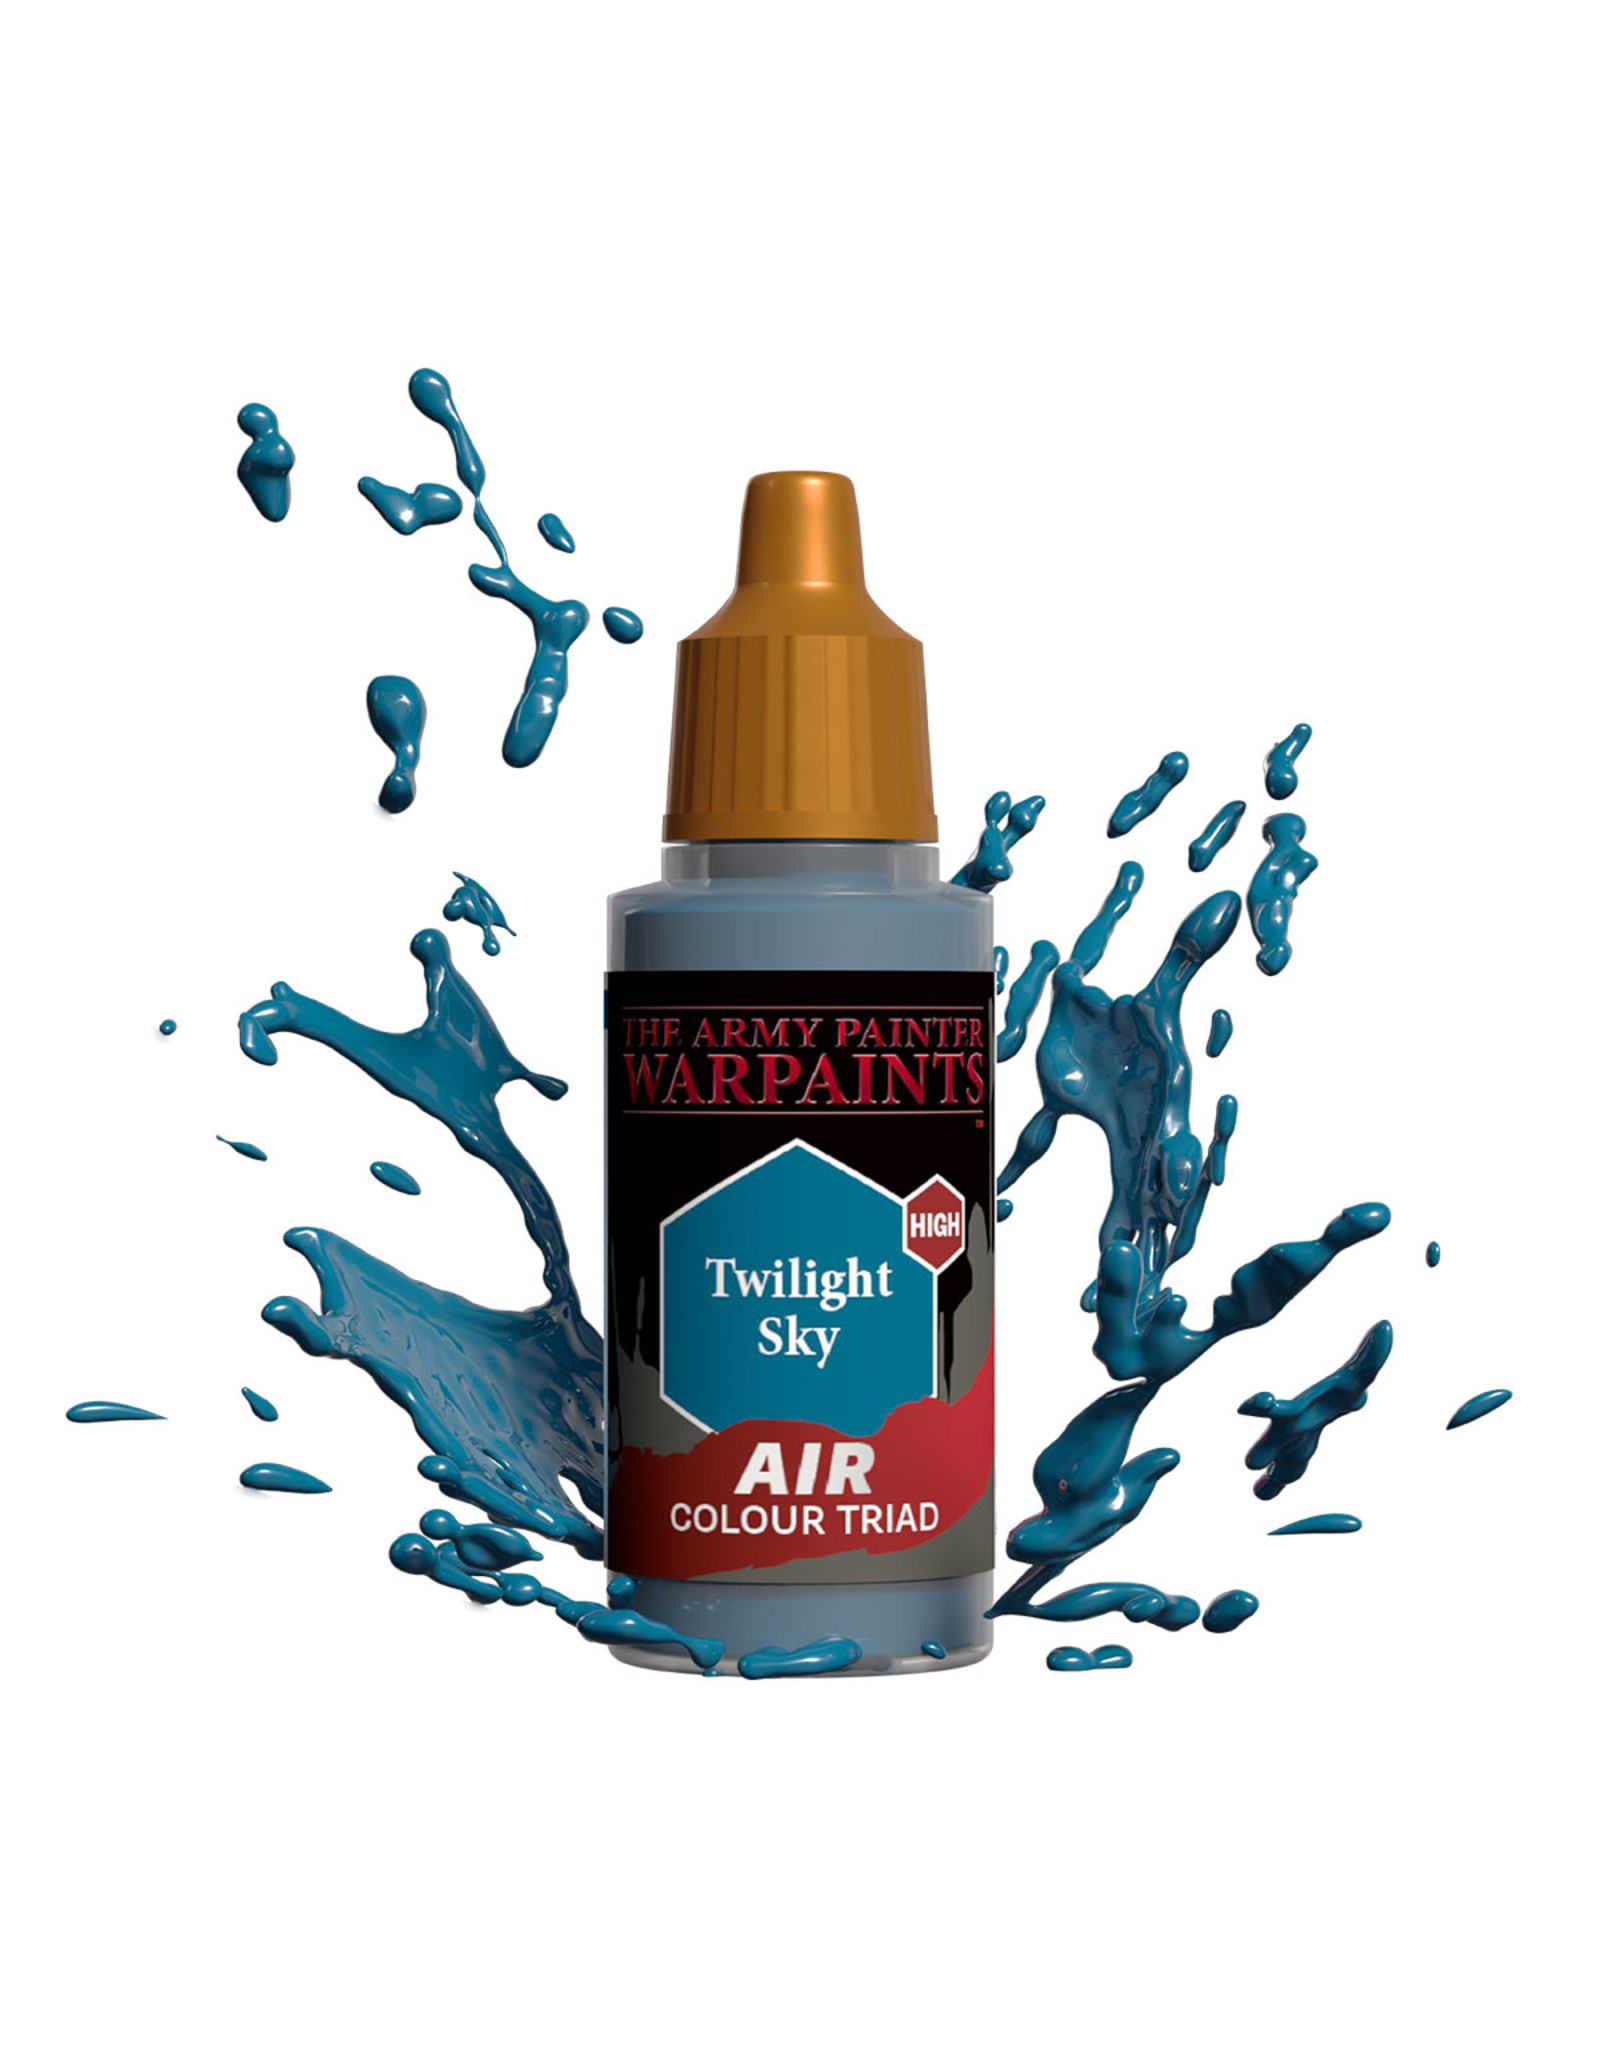 The Army Painter The Army Painter Warpaints Air: Twilight Sky